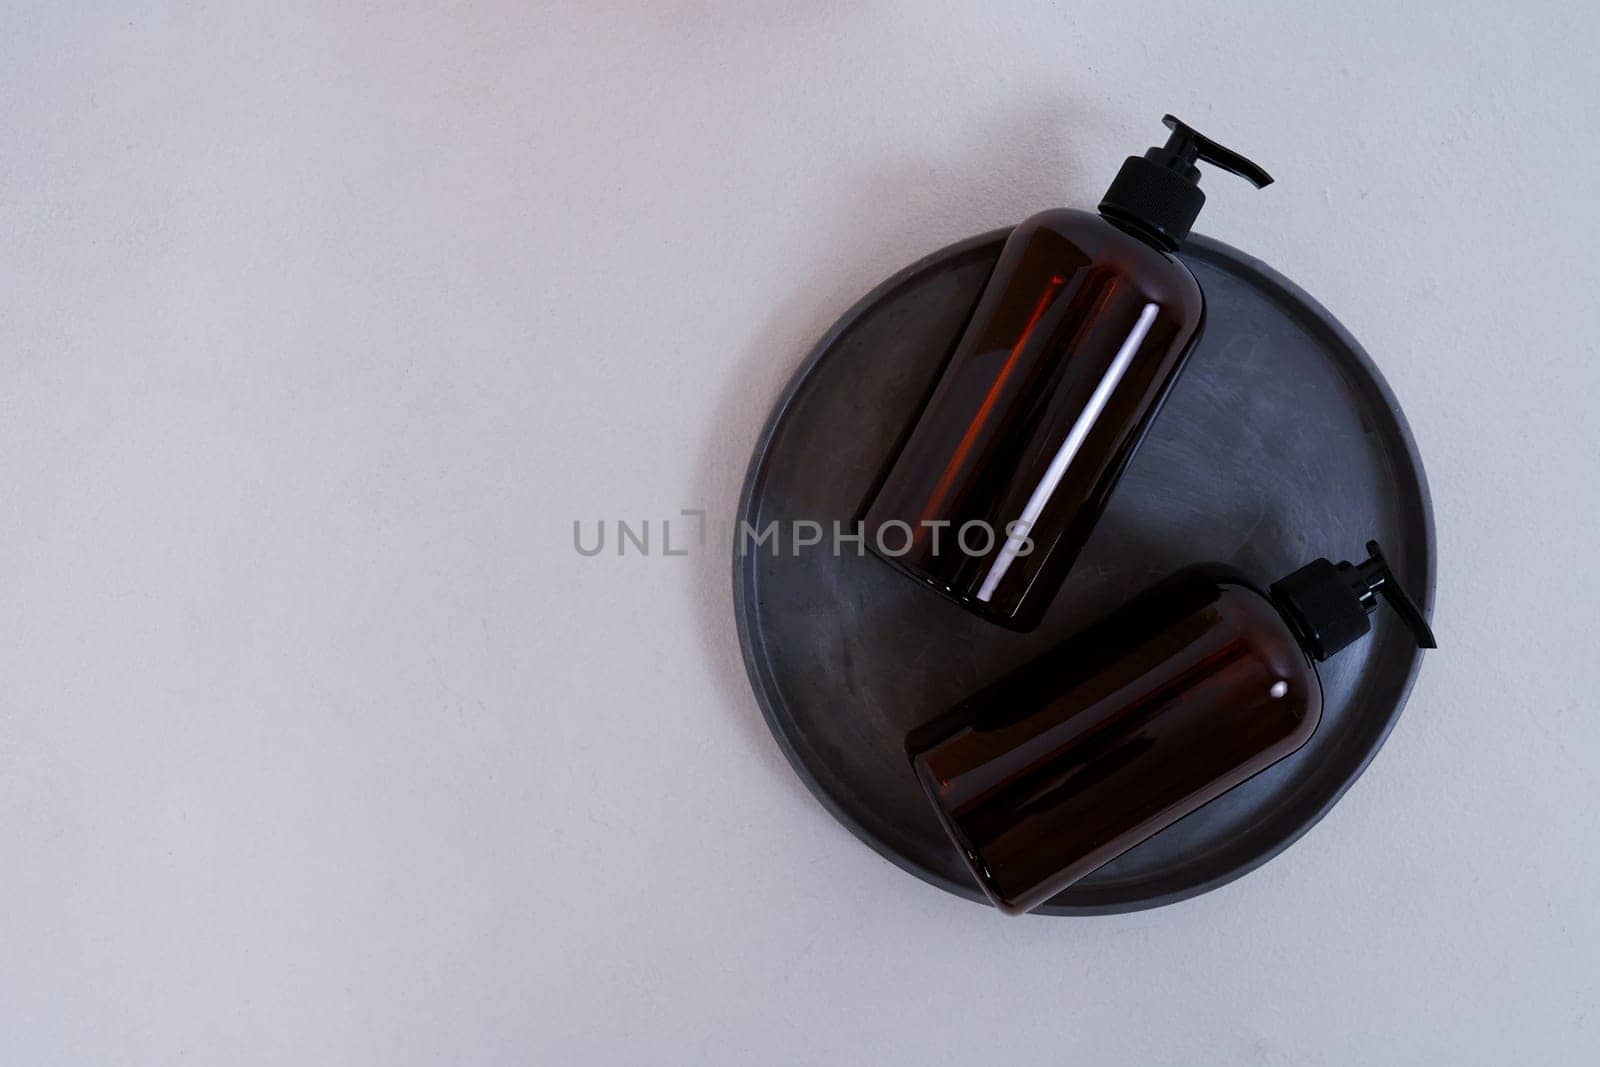 Composition with geometric shapes. Body care. two bottles with a dispenser on a black plate on a light gray background. Advertising concept. High quality photo